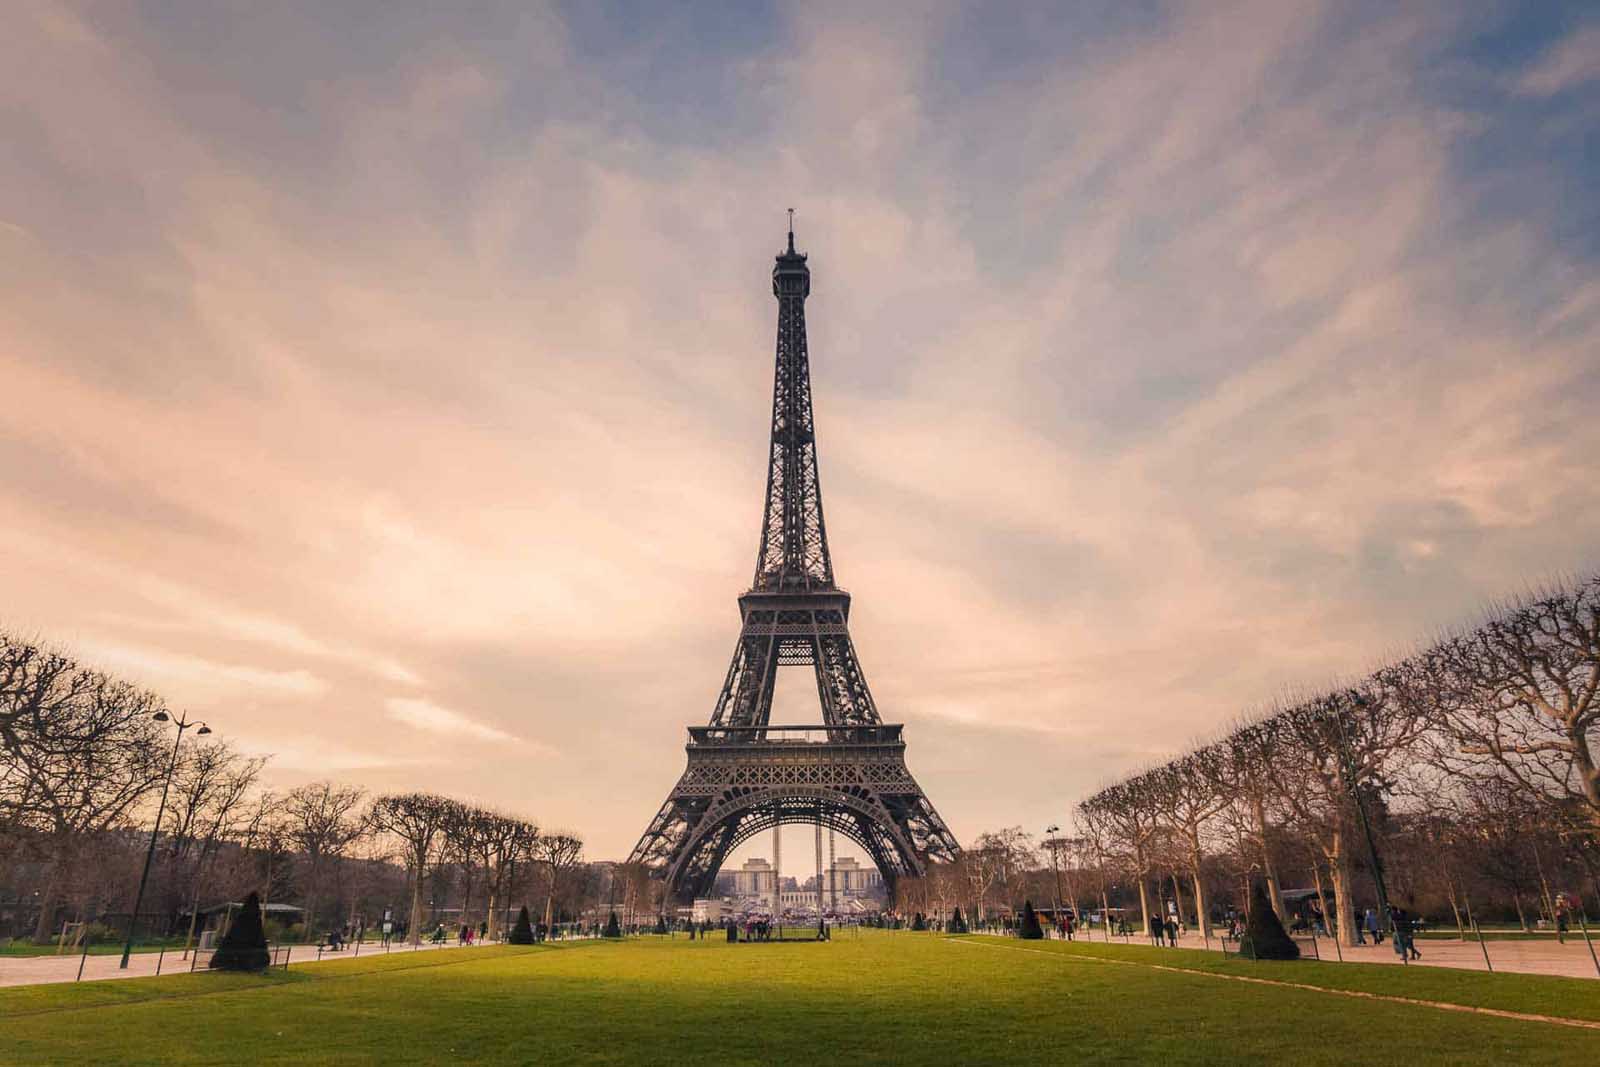 Where To Stay In Paris - Best Neighborhoods To Suit Your Travel Style